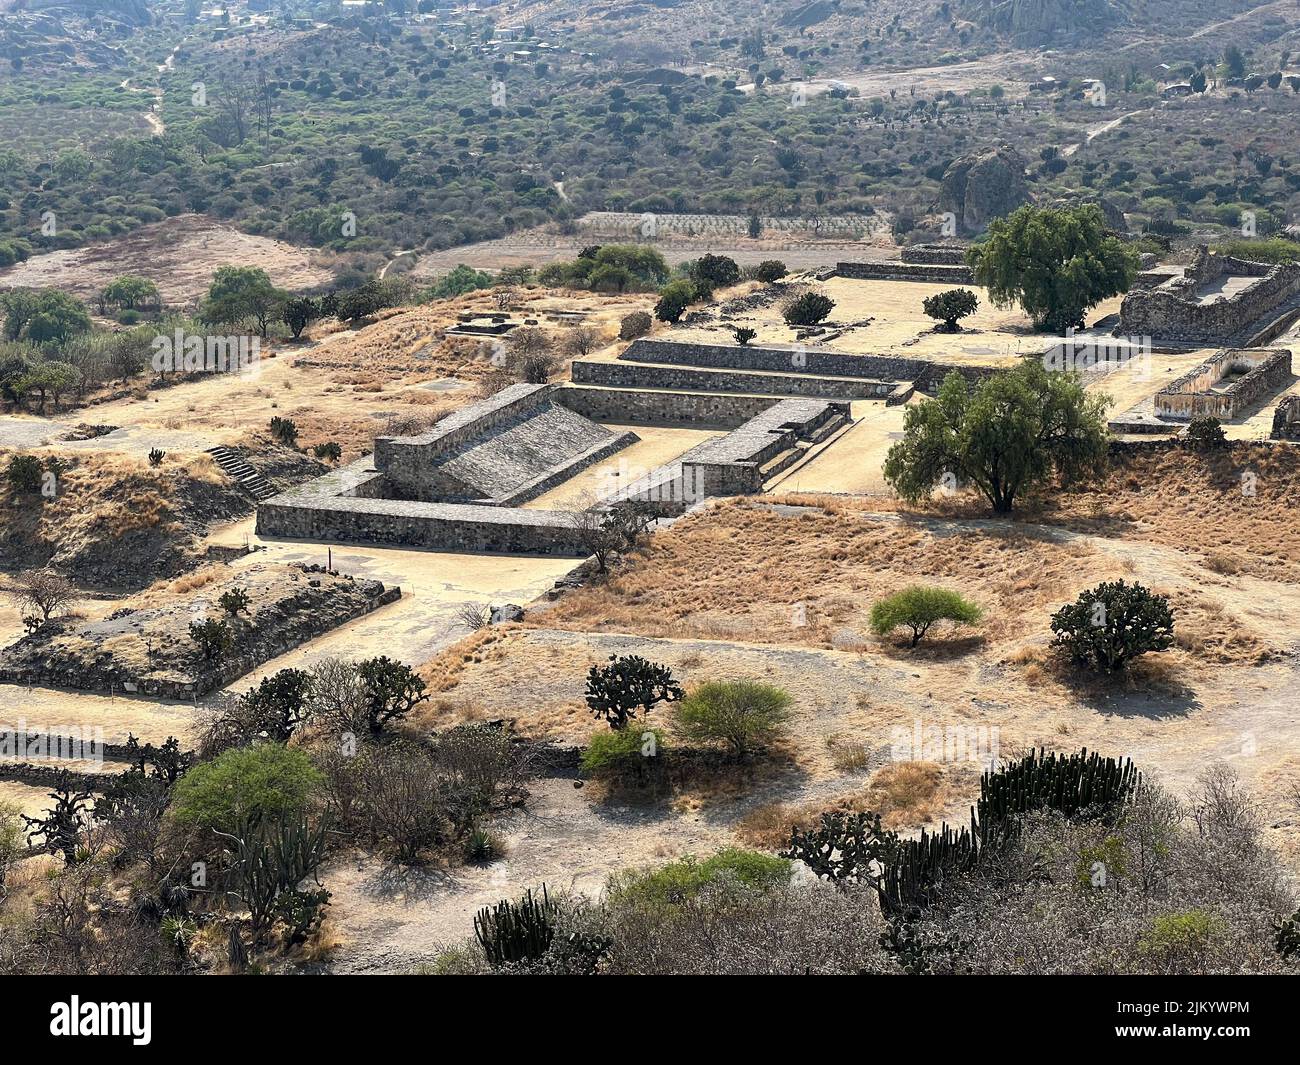 The bird's eye view of the Yagul Archaeological Zone in Mexico. Stock Photo